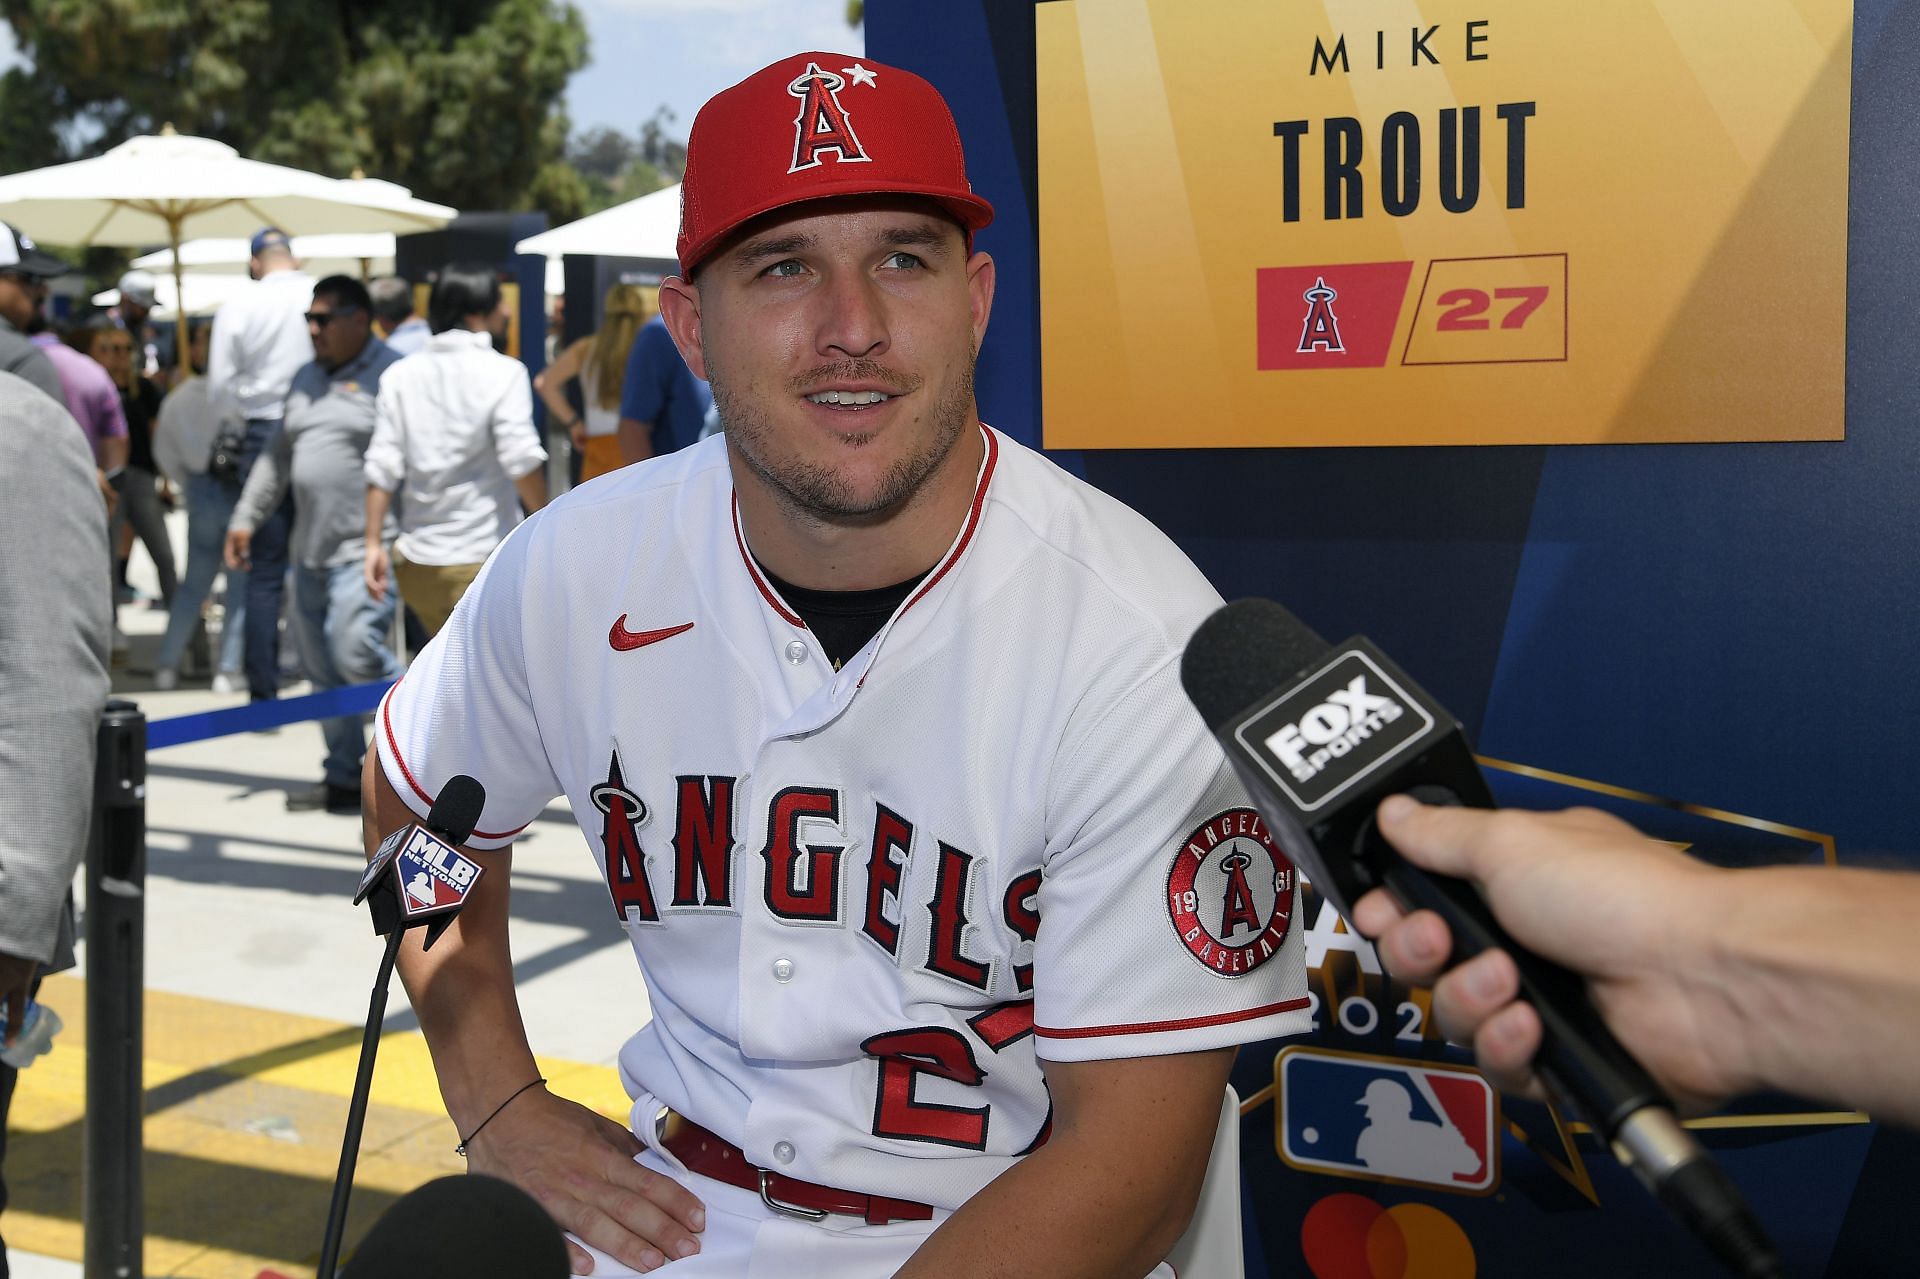 Mike Trout is expected to return to action this Friday against Detroit Tigers